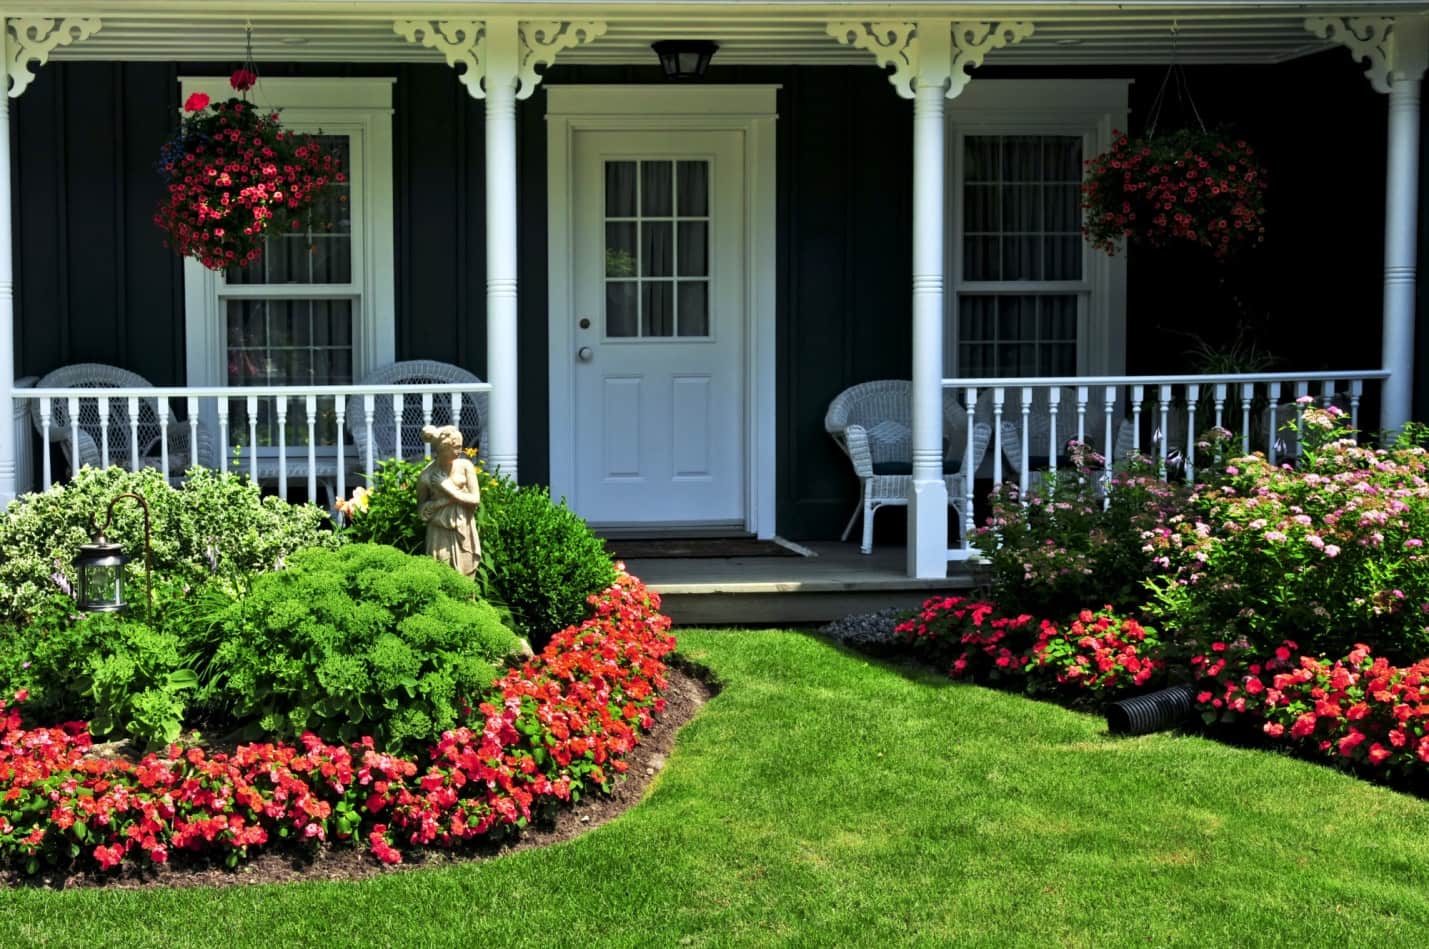 How to Update the Front of Your House to Make It More Appealing. Casual porch and dark house facade